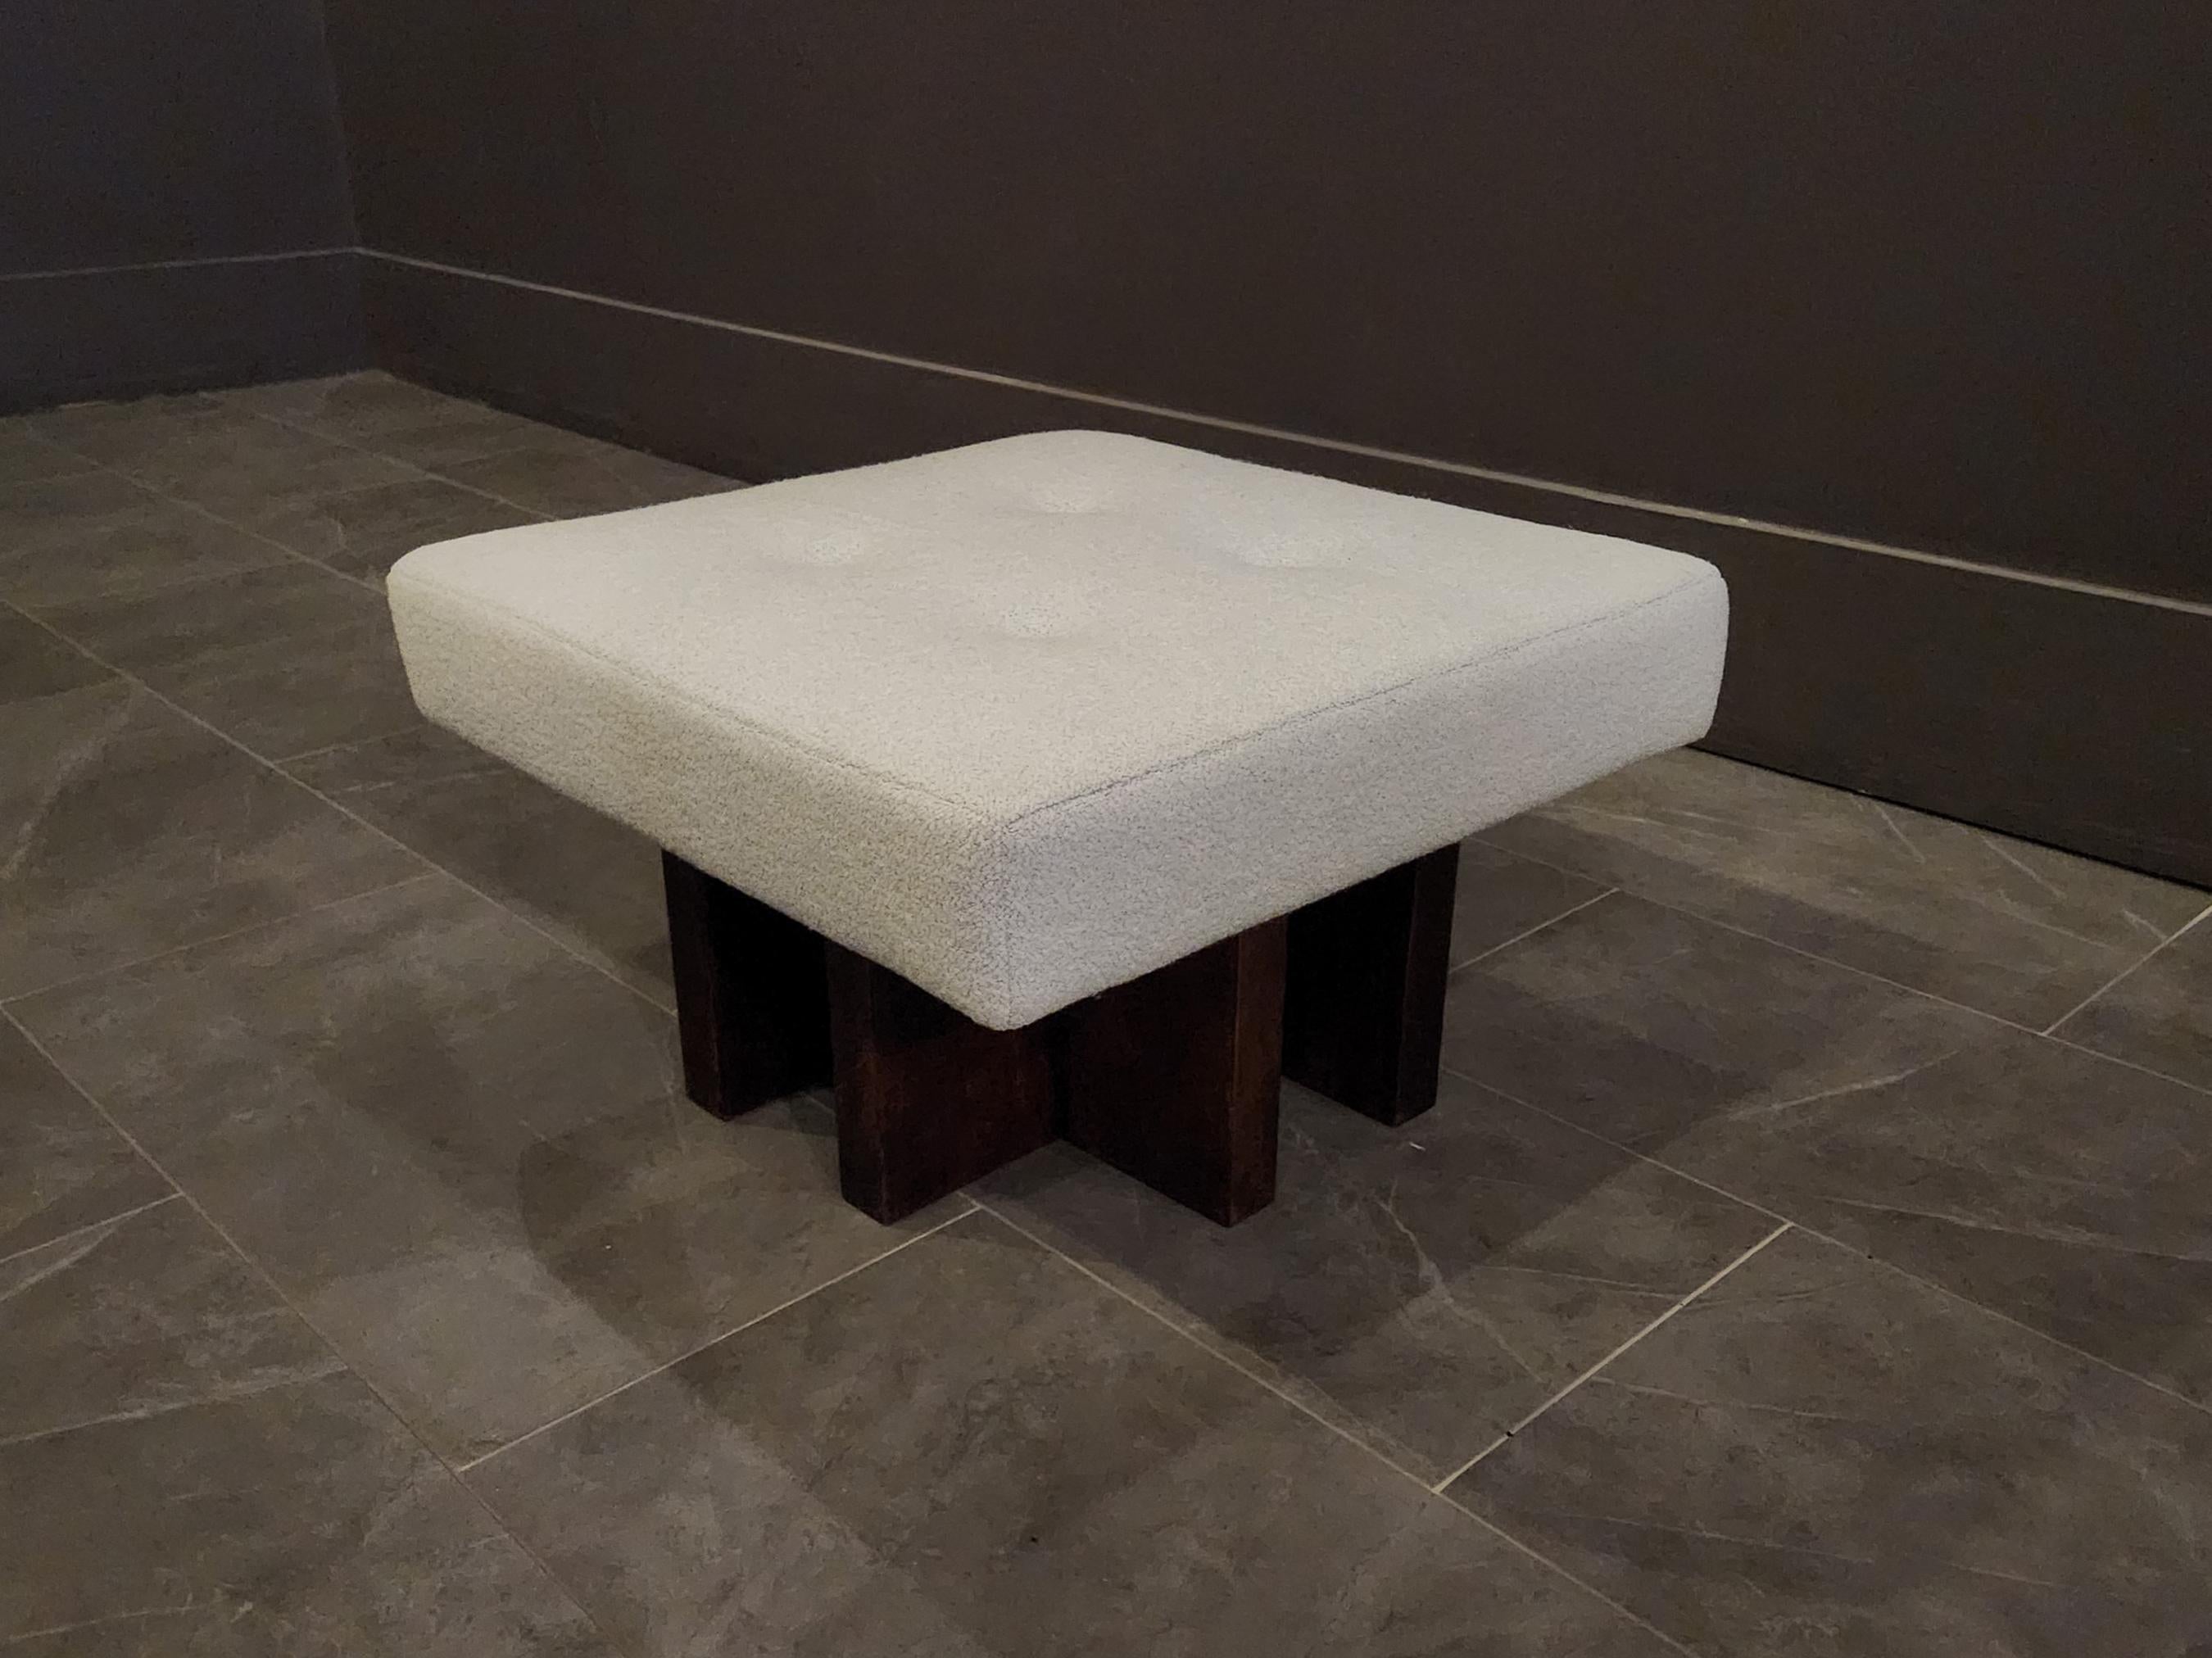 INTRODUCTION
Gueridon handmade ottomans are made to order to your liking and specifications.   100% made in USA.
Following the success of its ottomans, GUERIDON launched a full line of fully customizable ottomans, stools, benches, and day beds.  All